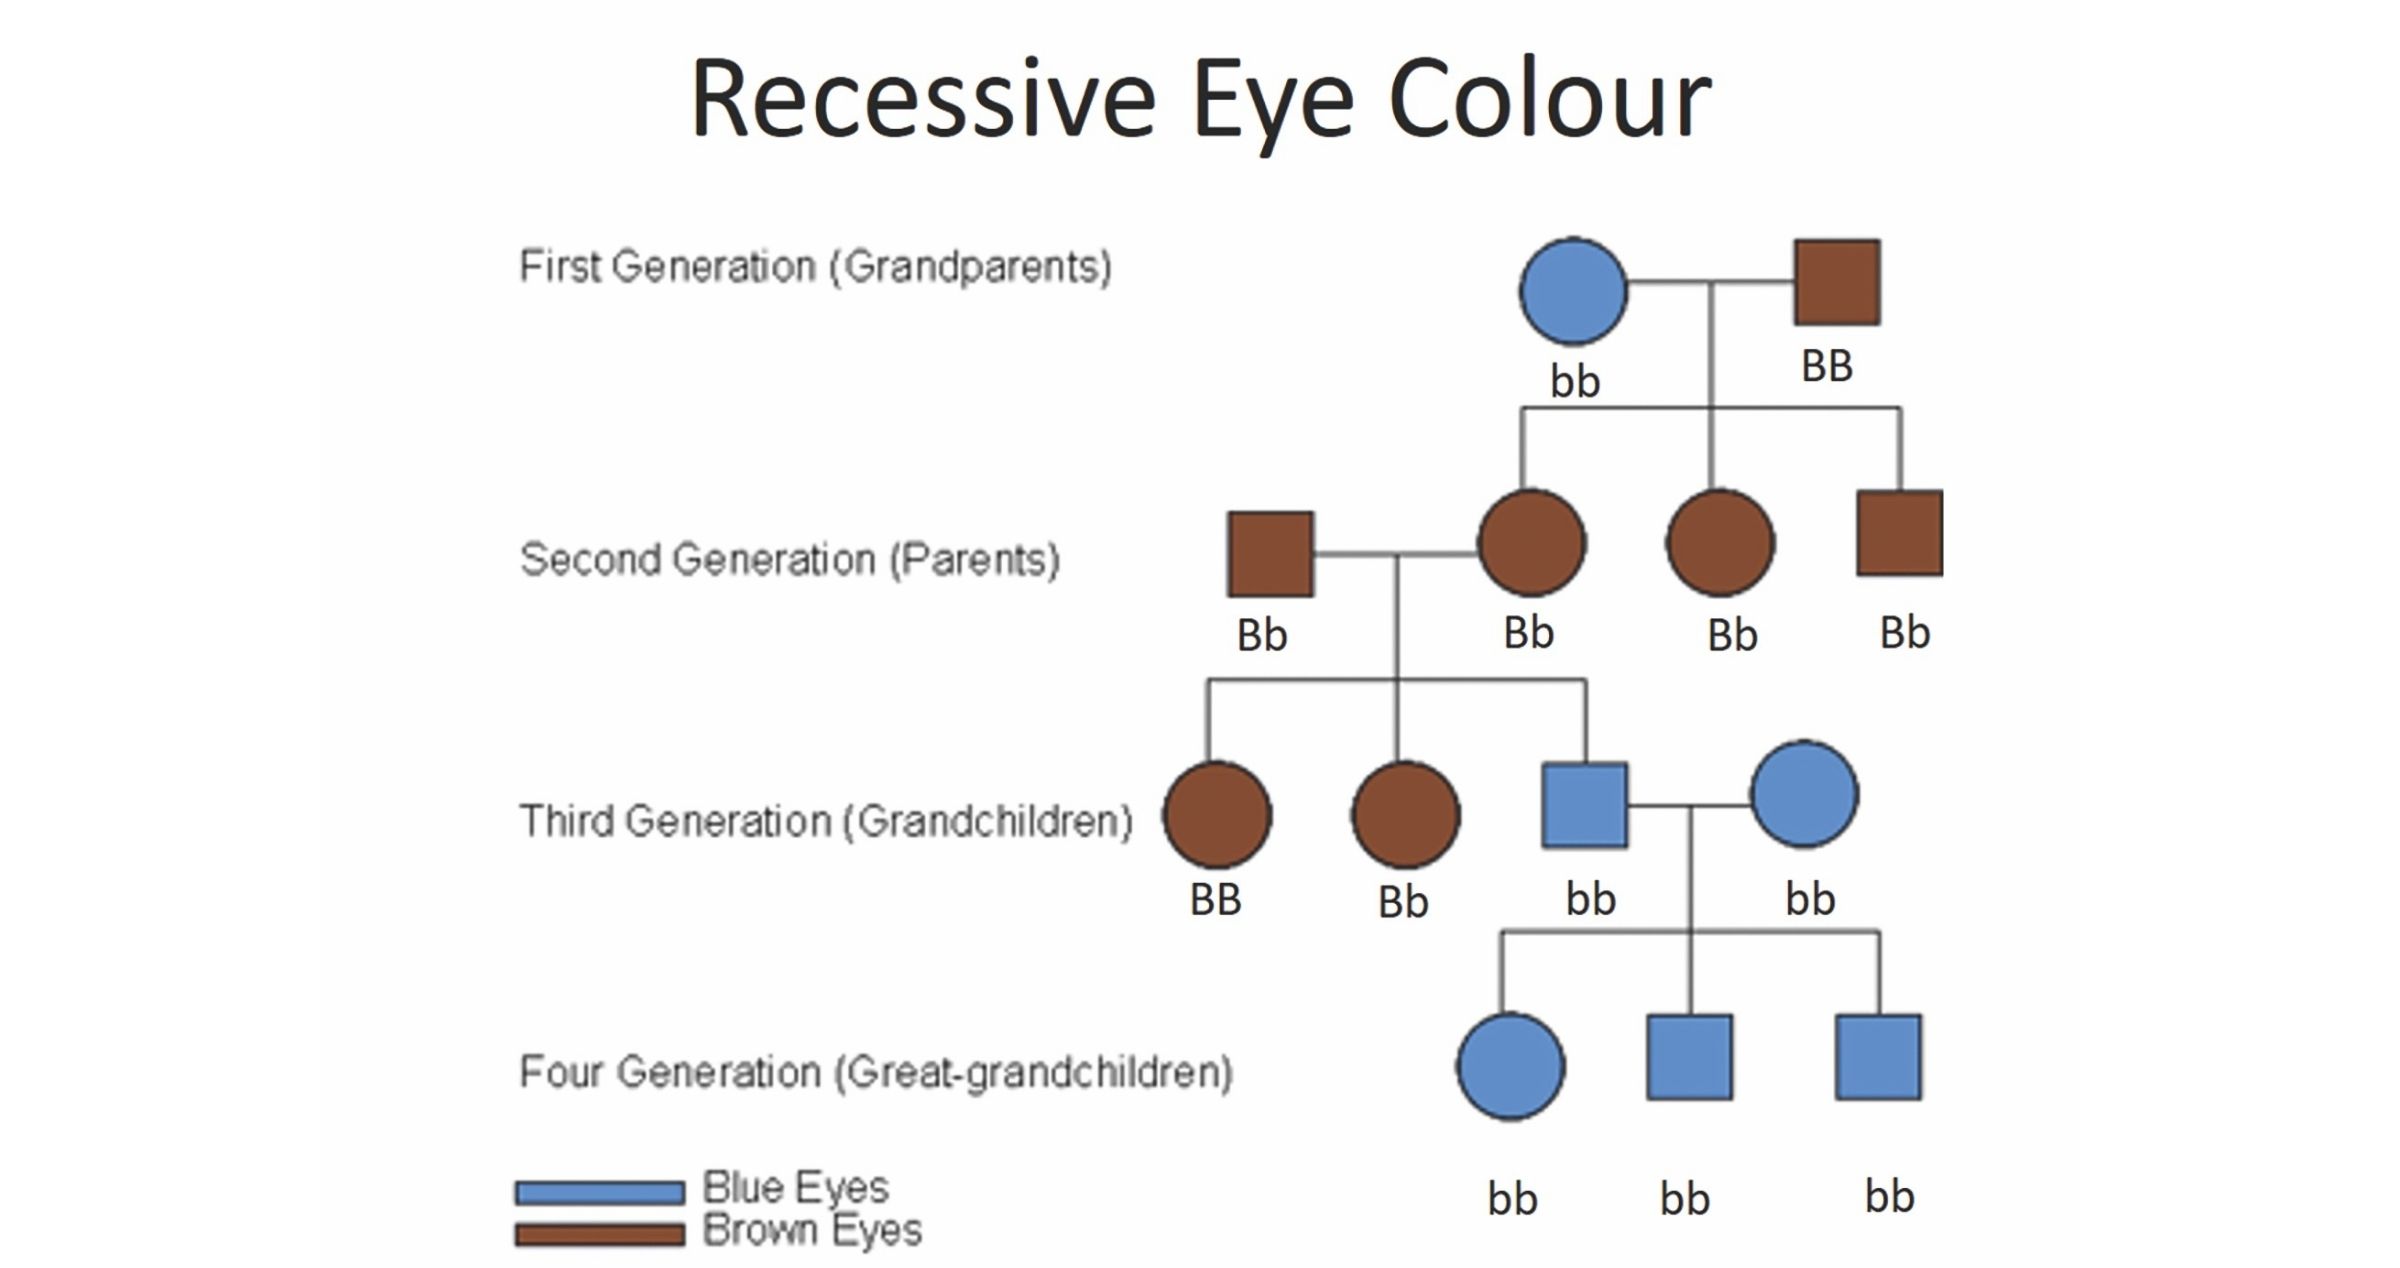 Image of flow chart showing recessive and dominant eye factors